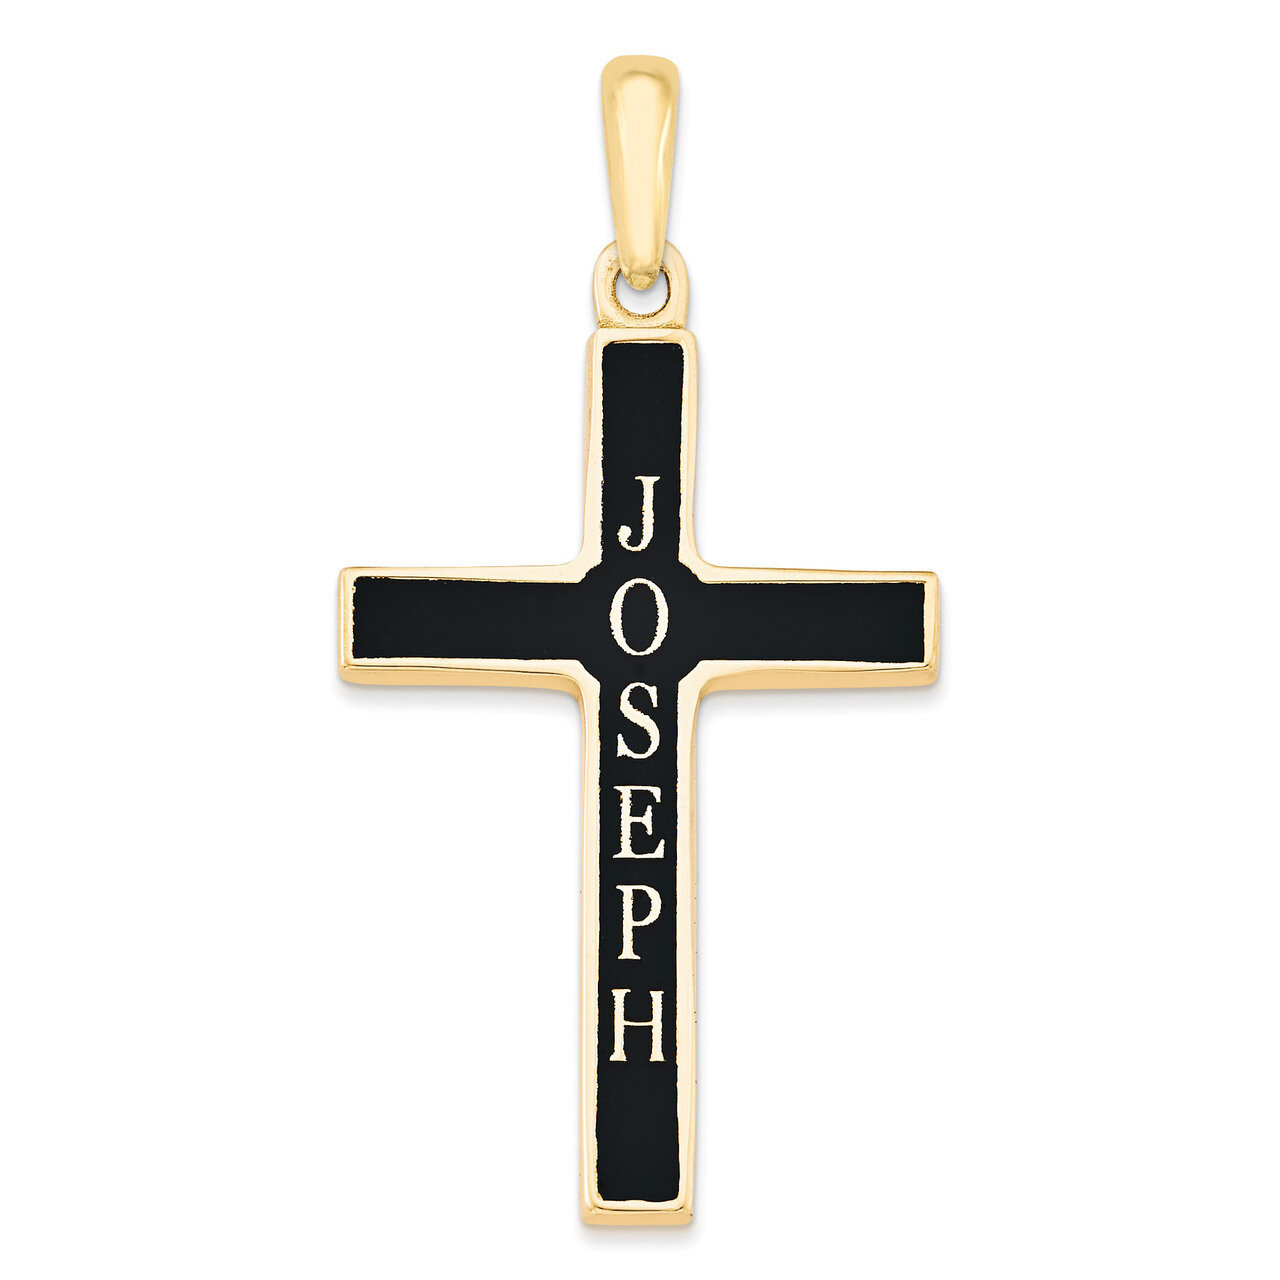 14k GoldY Casted High Polished with Antique Letters Name Cross Pendant 14k Gold XNA512Y